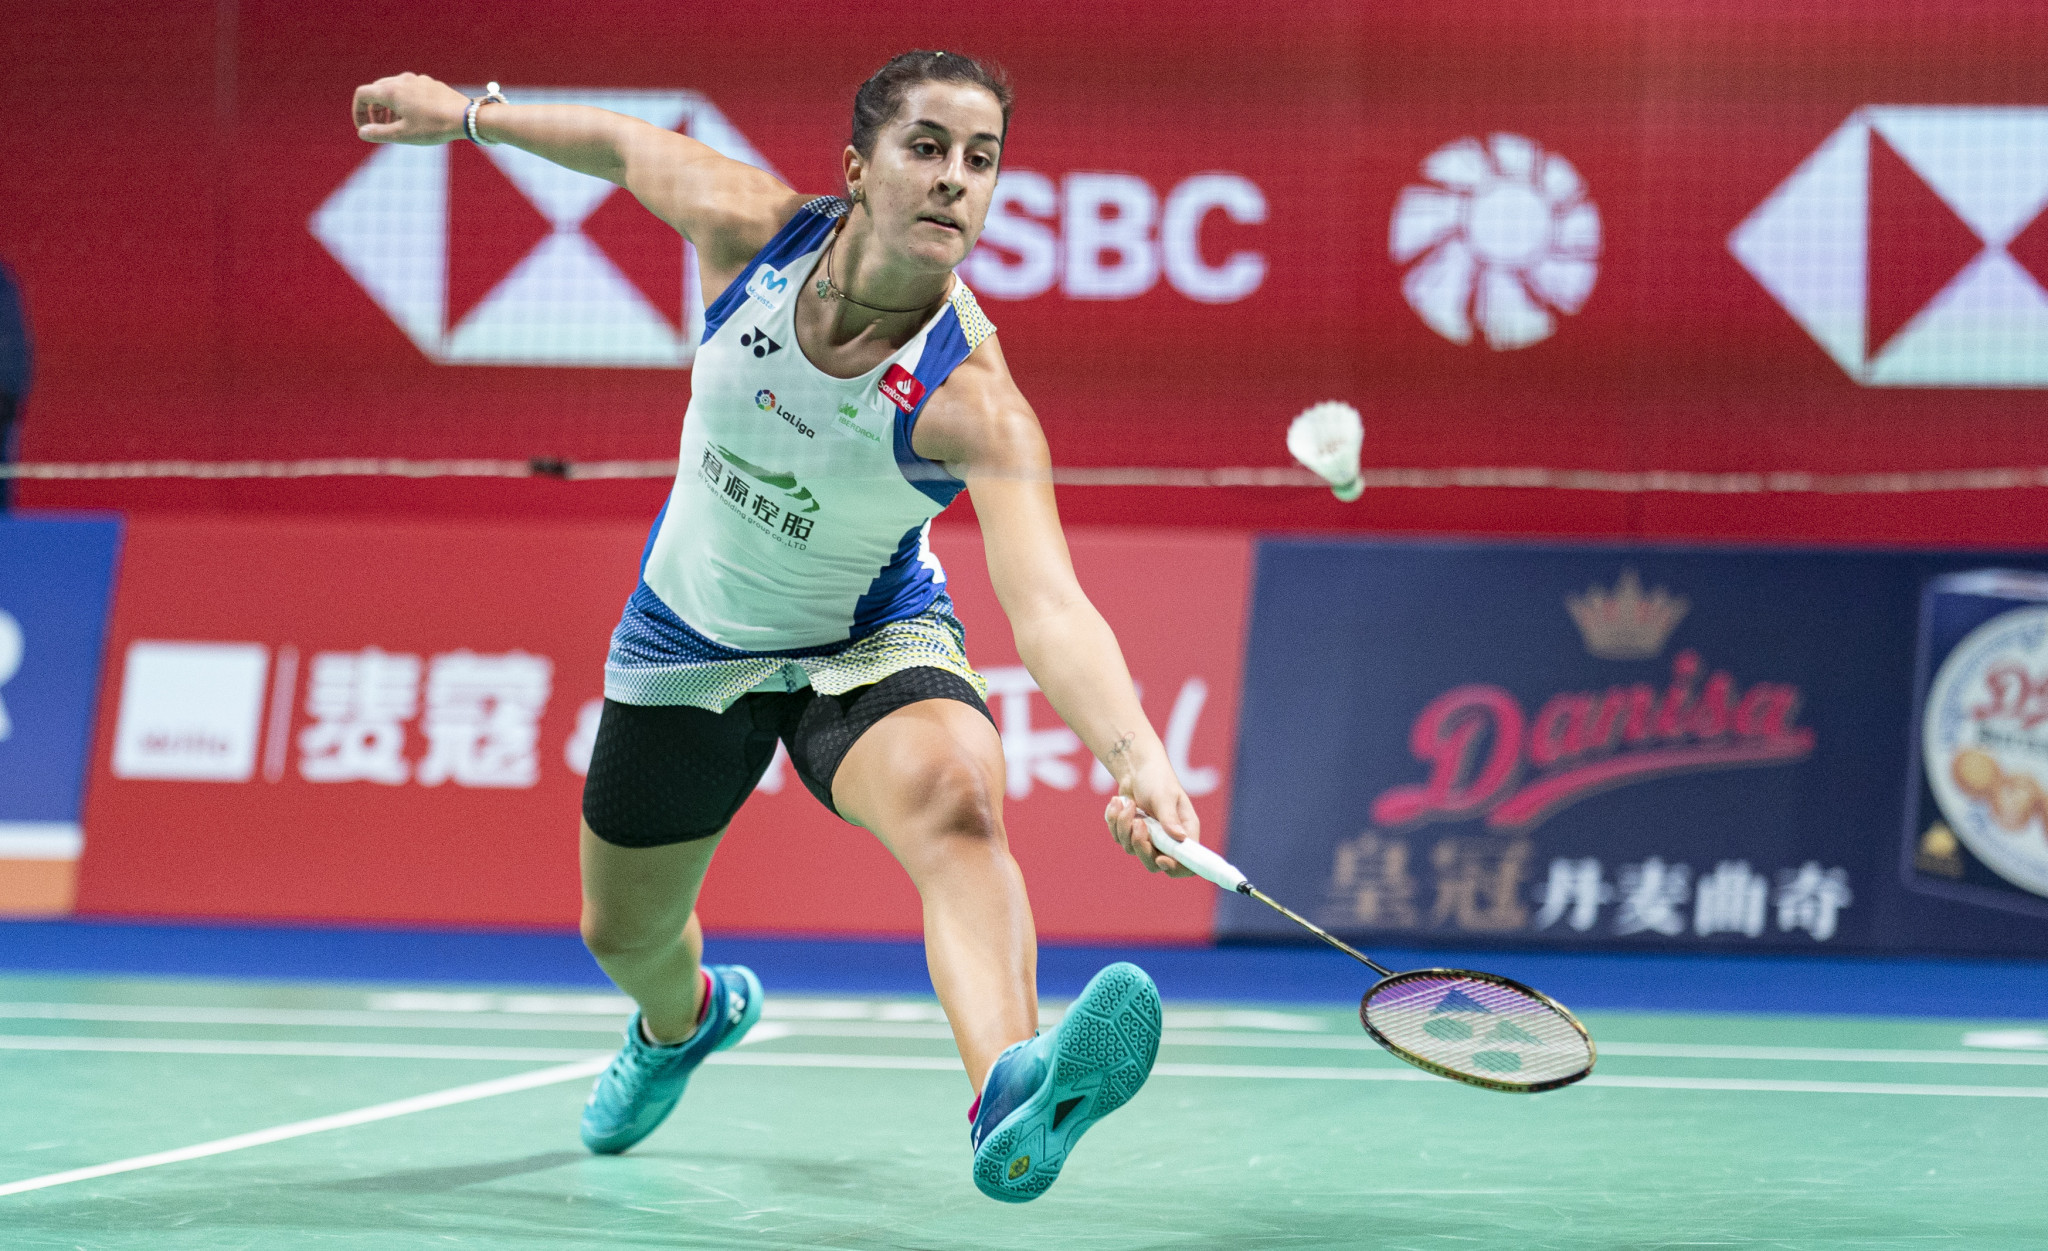 Top seeds ease through to last 16 at European Badminton Championships